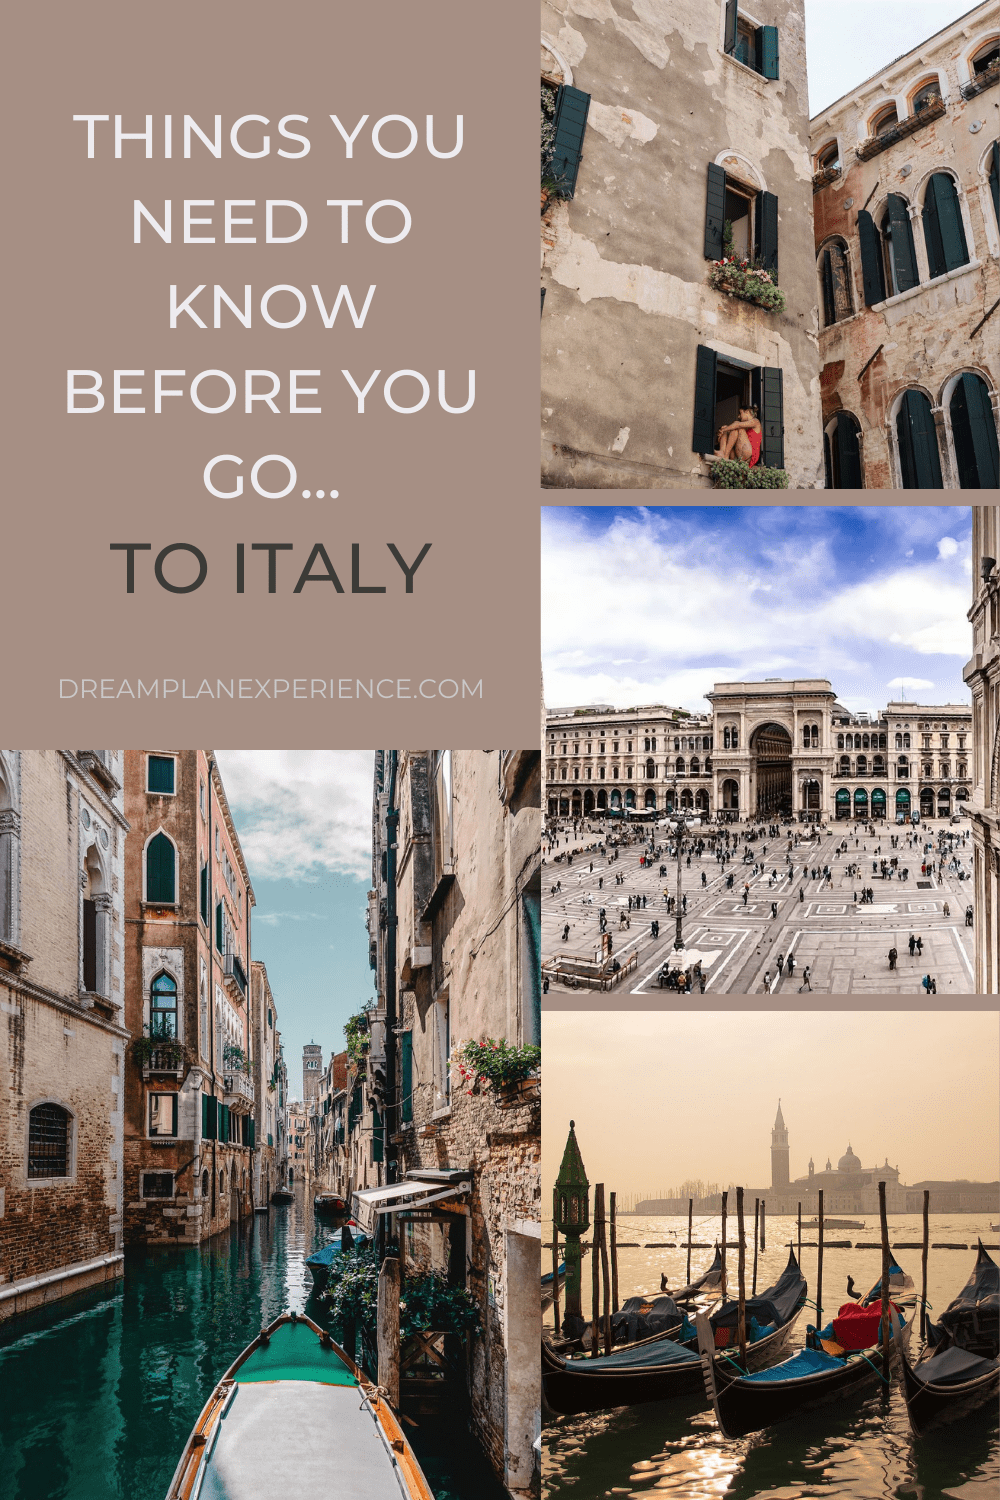 Going to Italy? This travel guide shares things you should know when traveling to Italy, including the best places to go in Italy and best time to go.